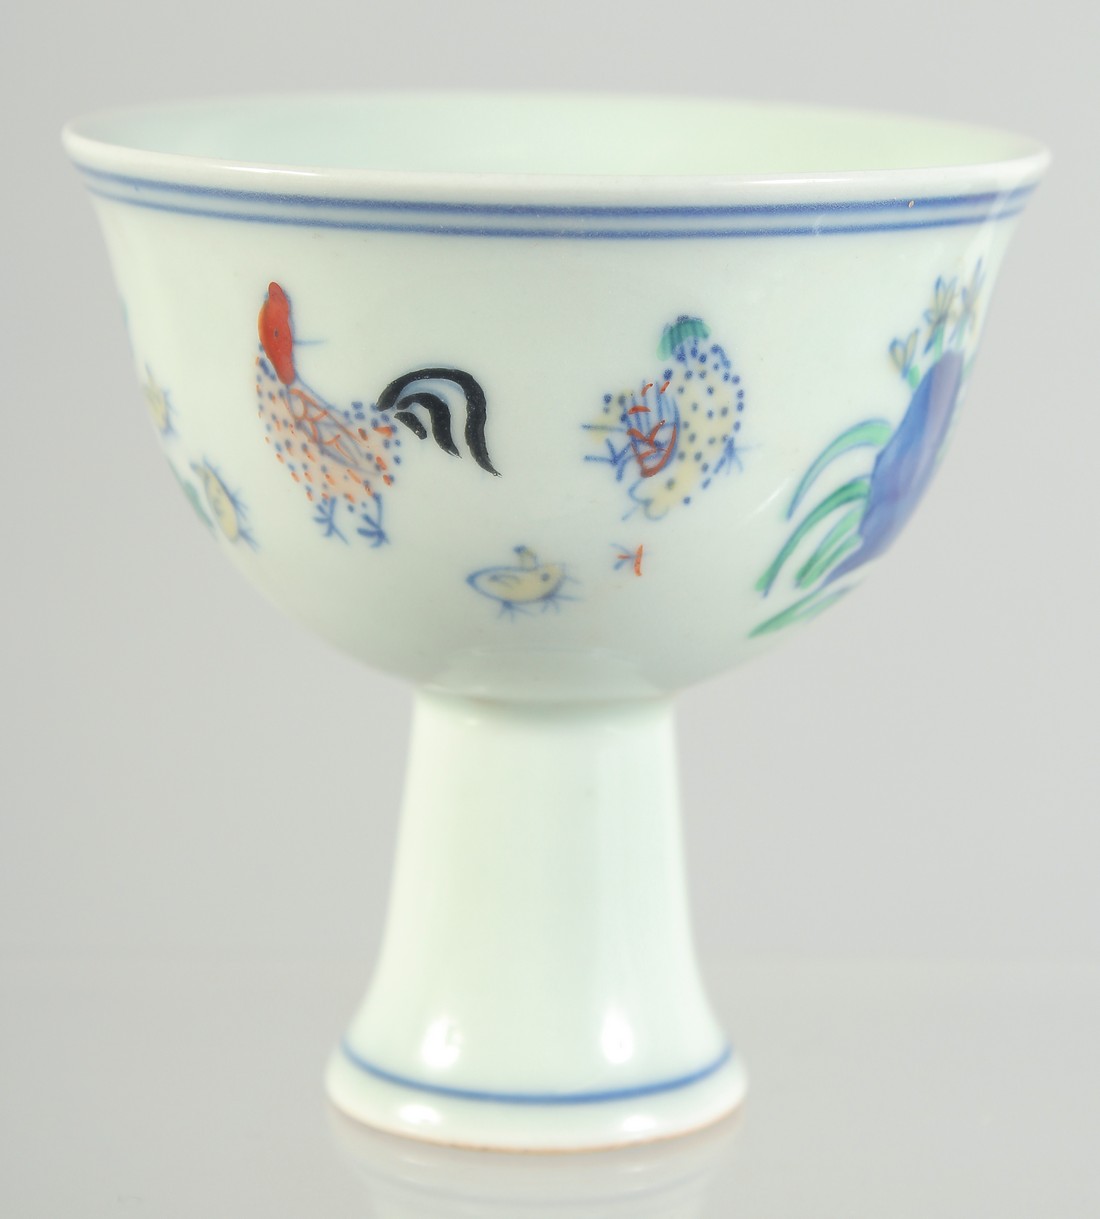 A CHINESE DOUCAI PORCELAIN CHICKEN STEM CUP, six-character mark to inner foot rim, 8.5cm high. - Image 2 of 5